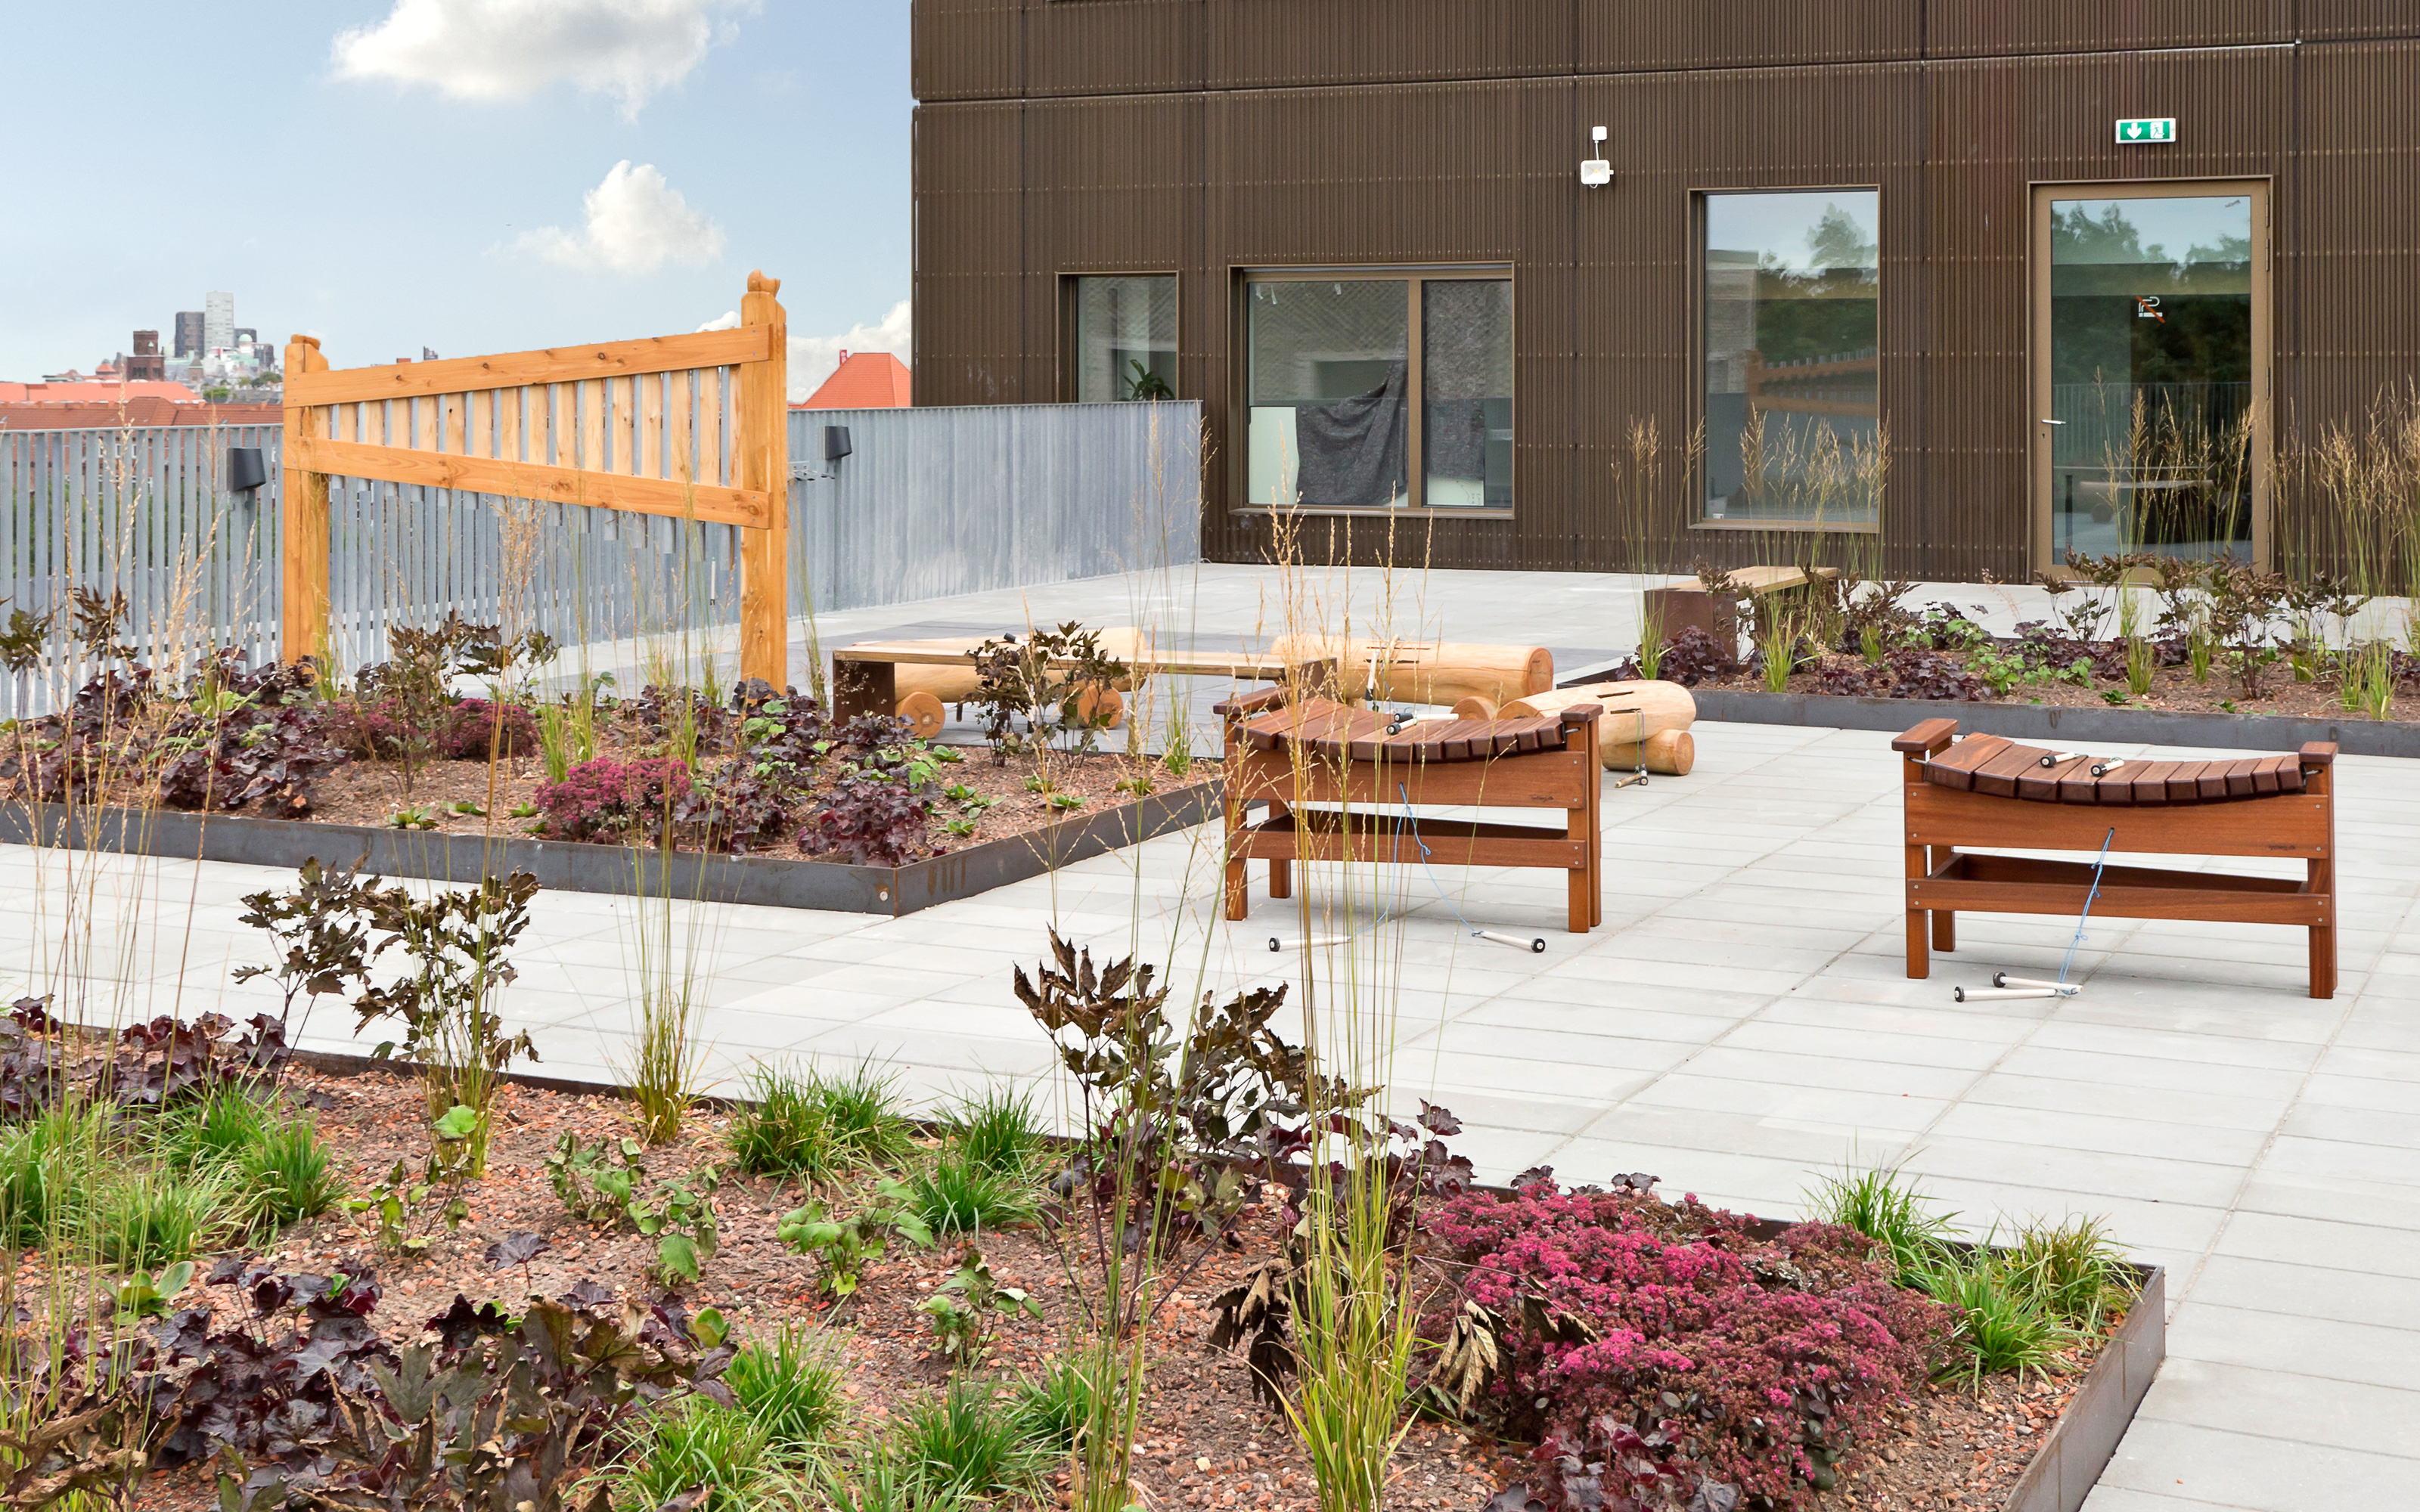 Roof garden with chairs and plant beds